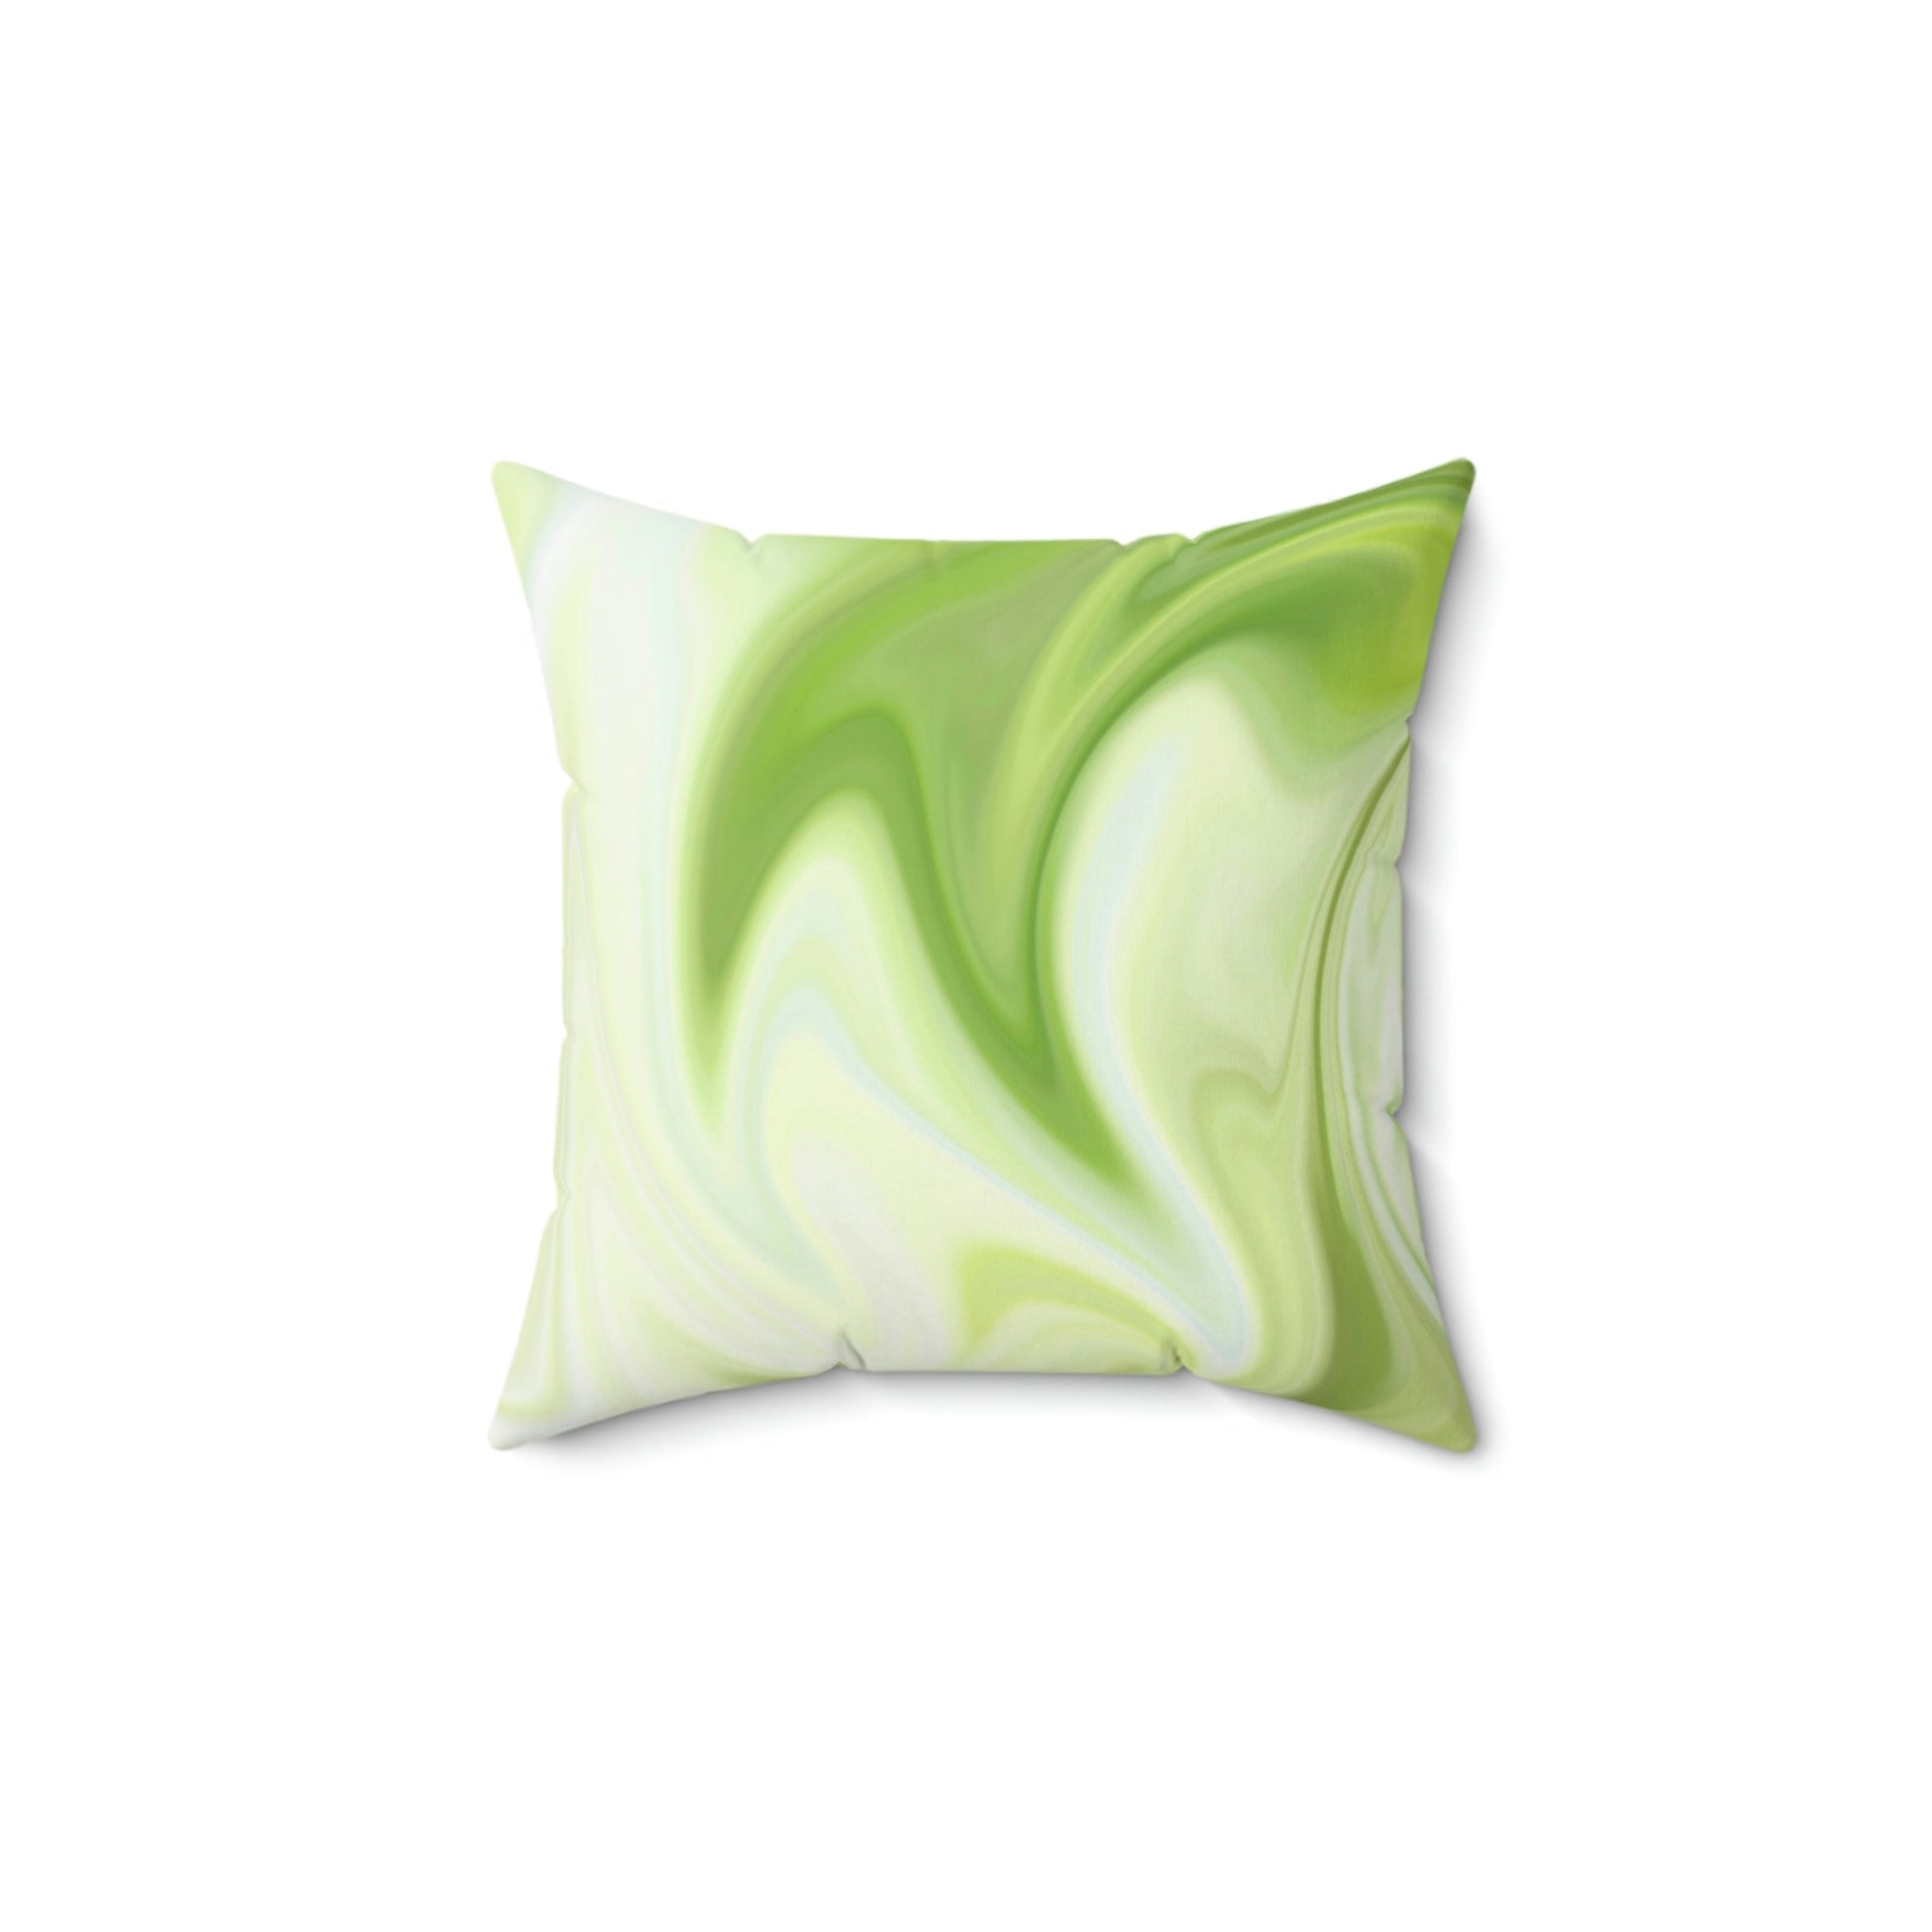 Melted Green Apple Square Pillow Home Decor Pink Sweetheart